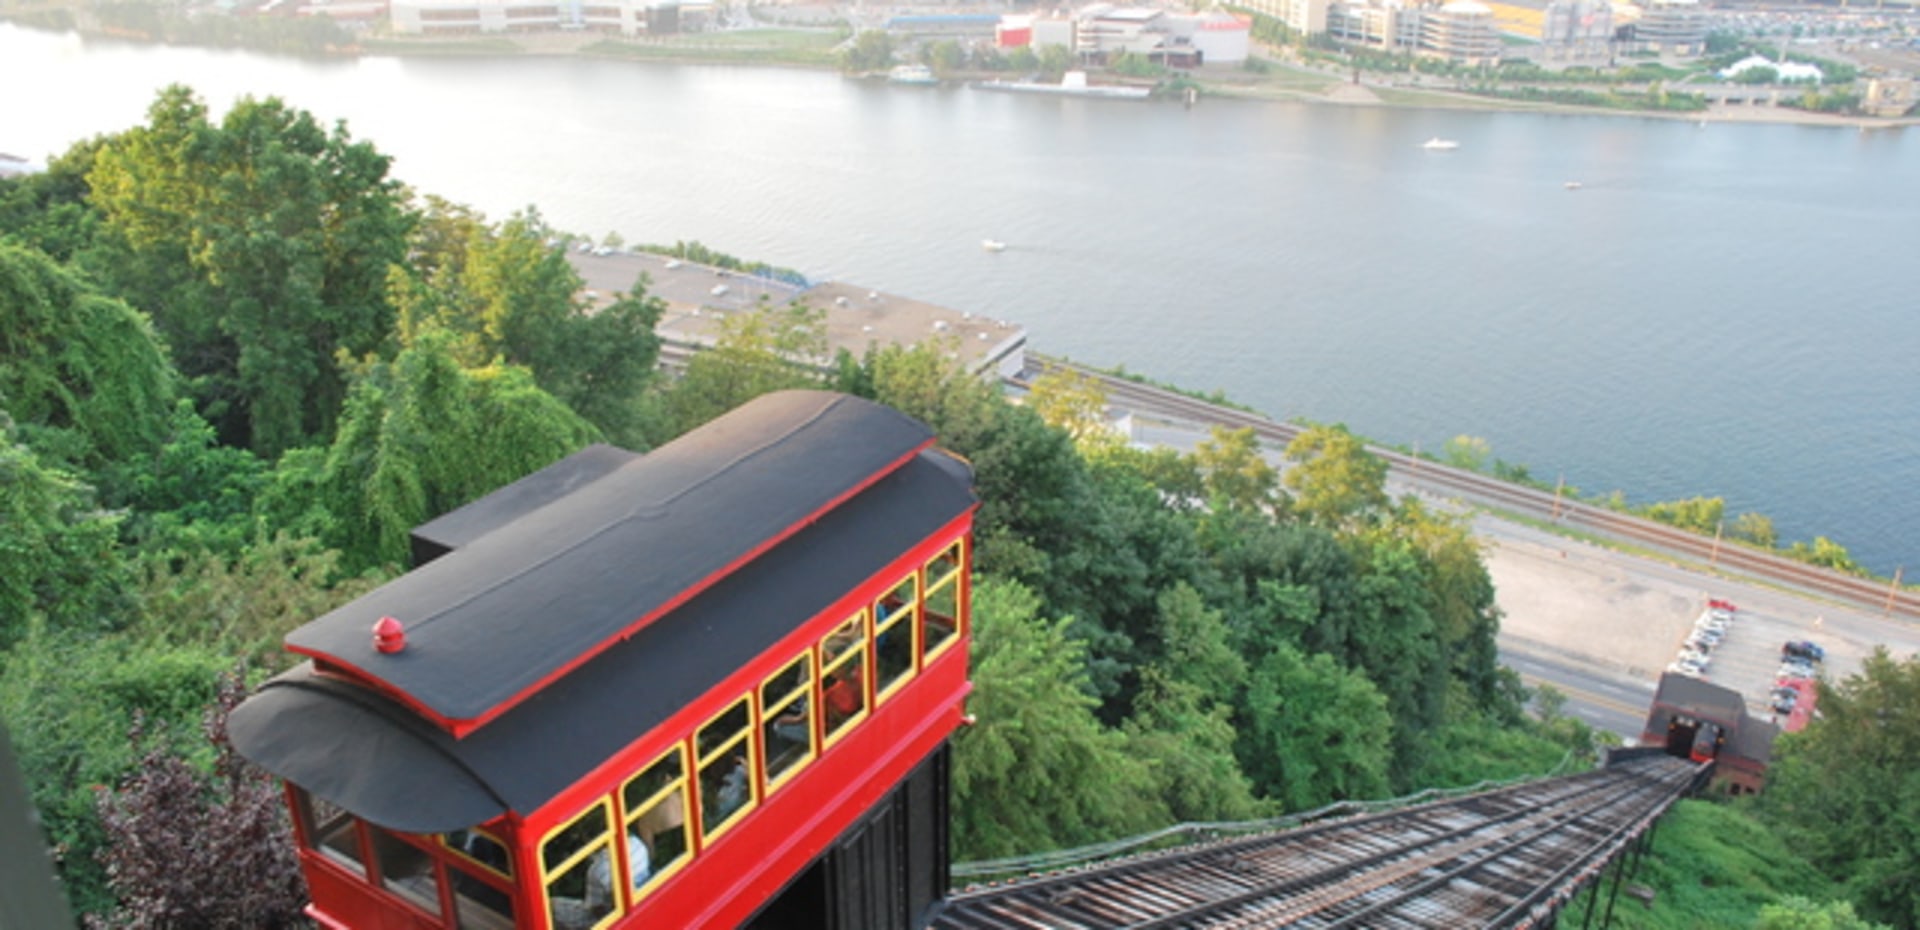 The Duquesne Incline is a funicular located near Pittsburgh's South Side neighborhood and scaling Mt. Washington in Pennsylvania, United States.